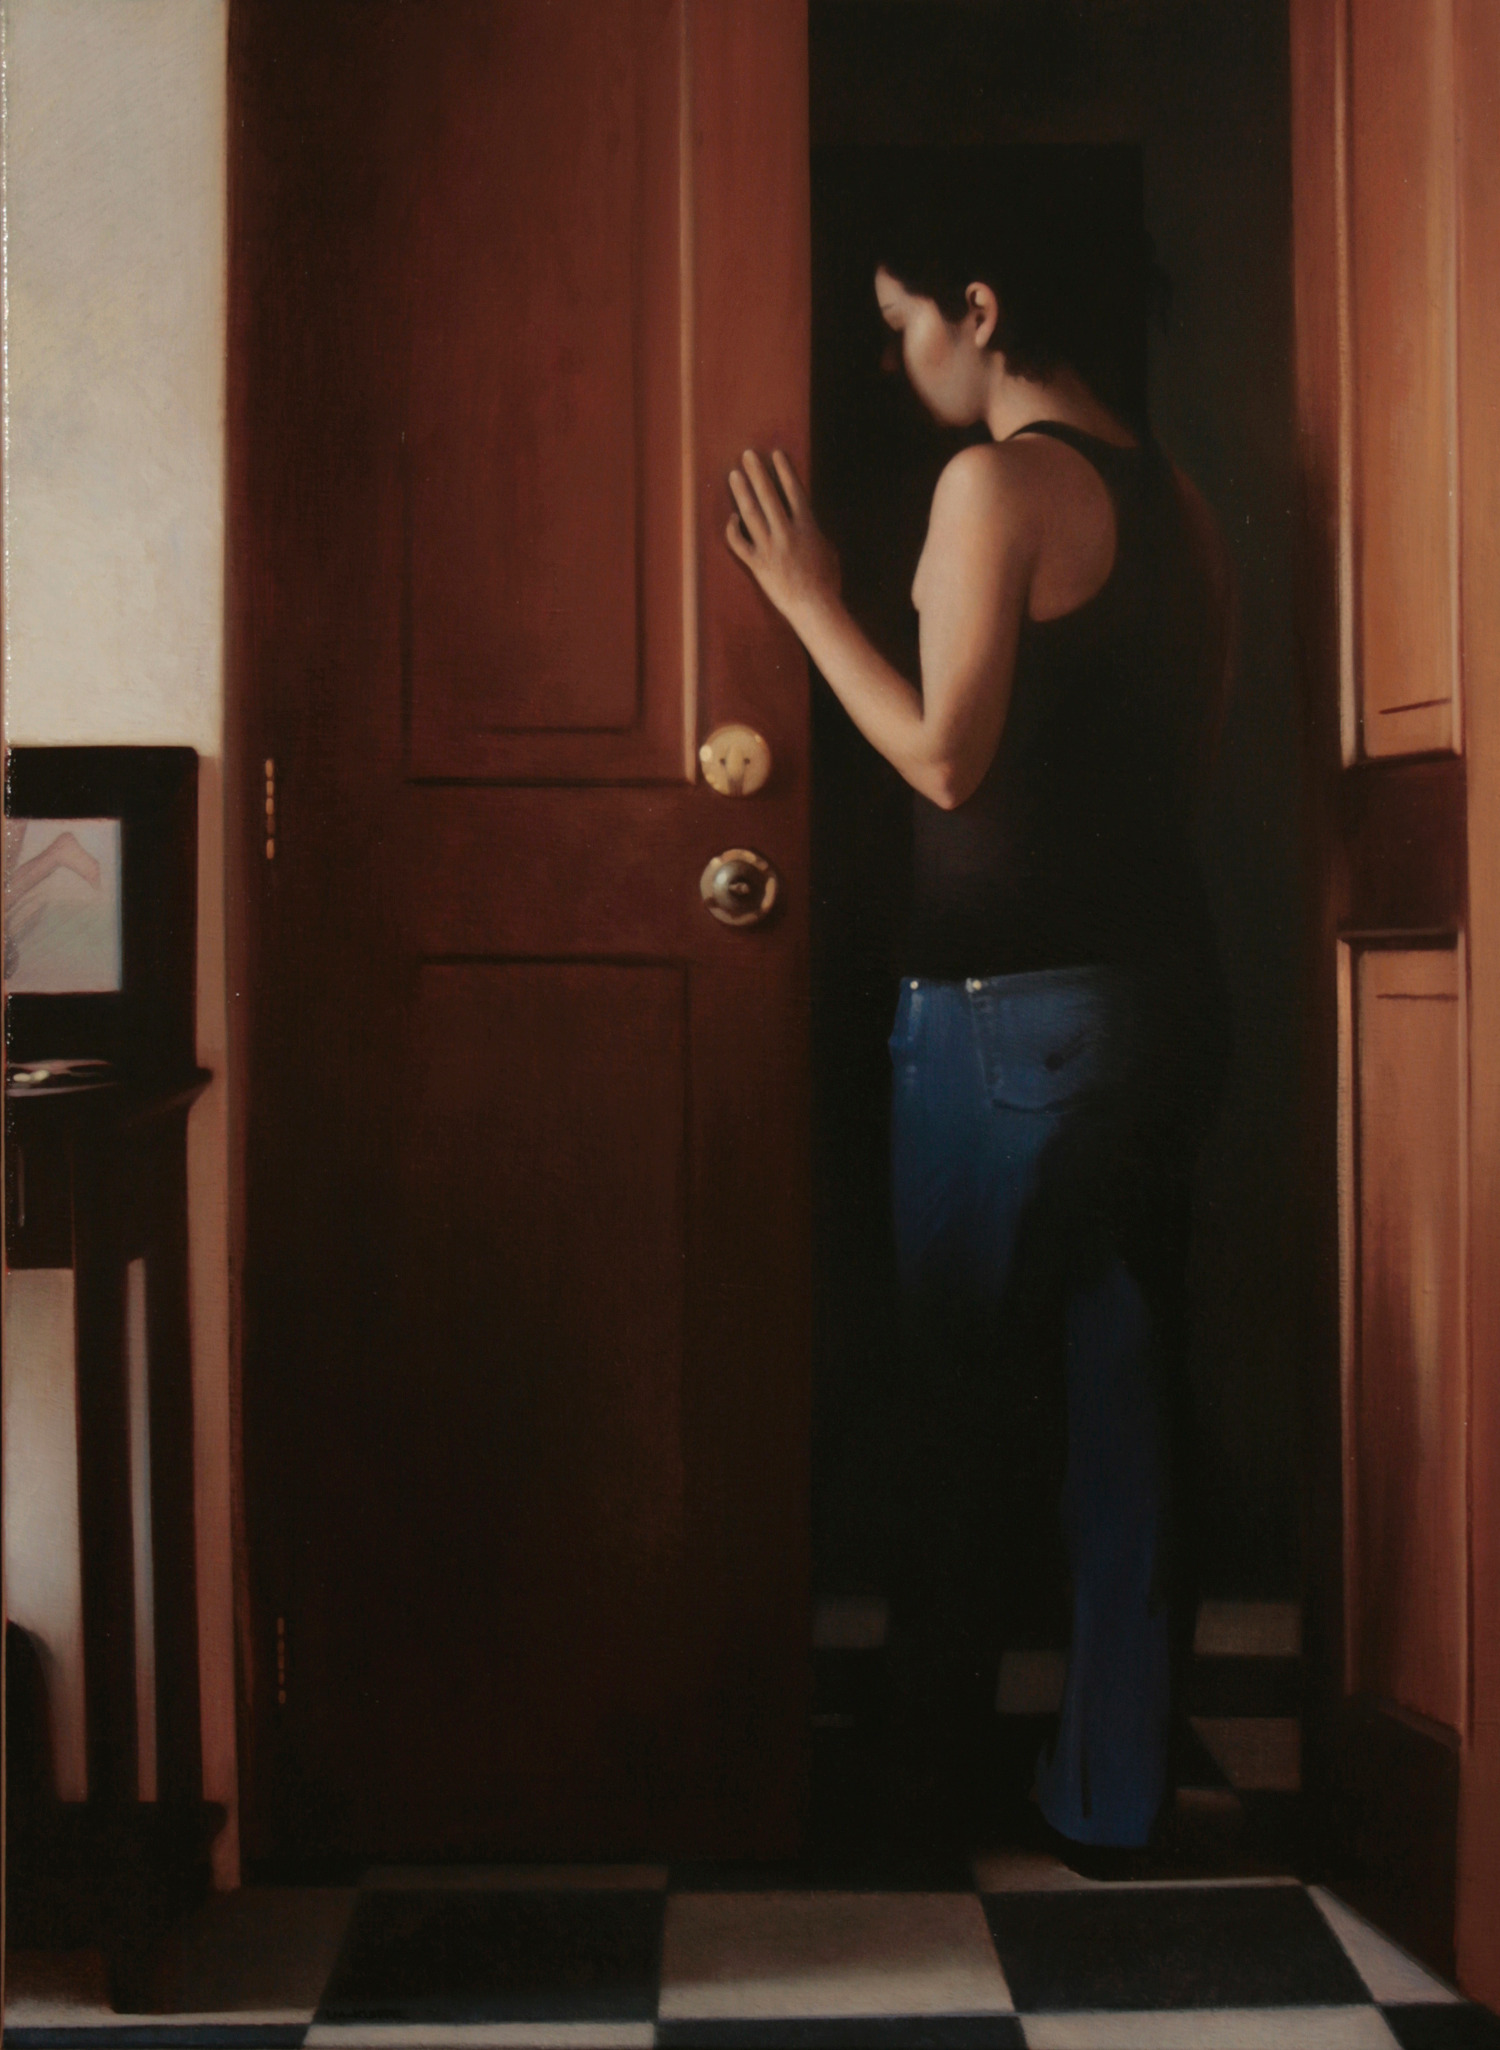   Evanesce,&nbsp; 2010, Oil on linen, 30 x 22 inches, Private collection 